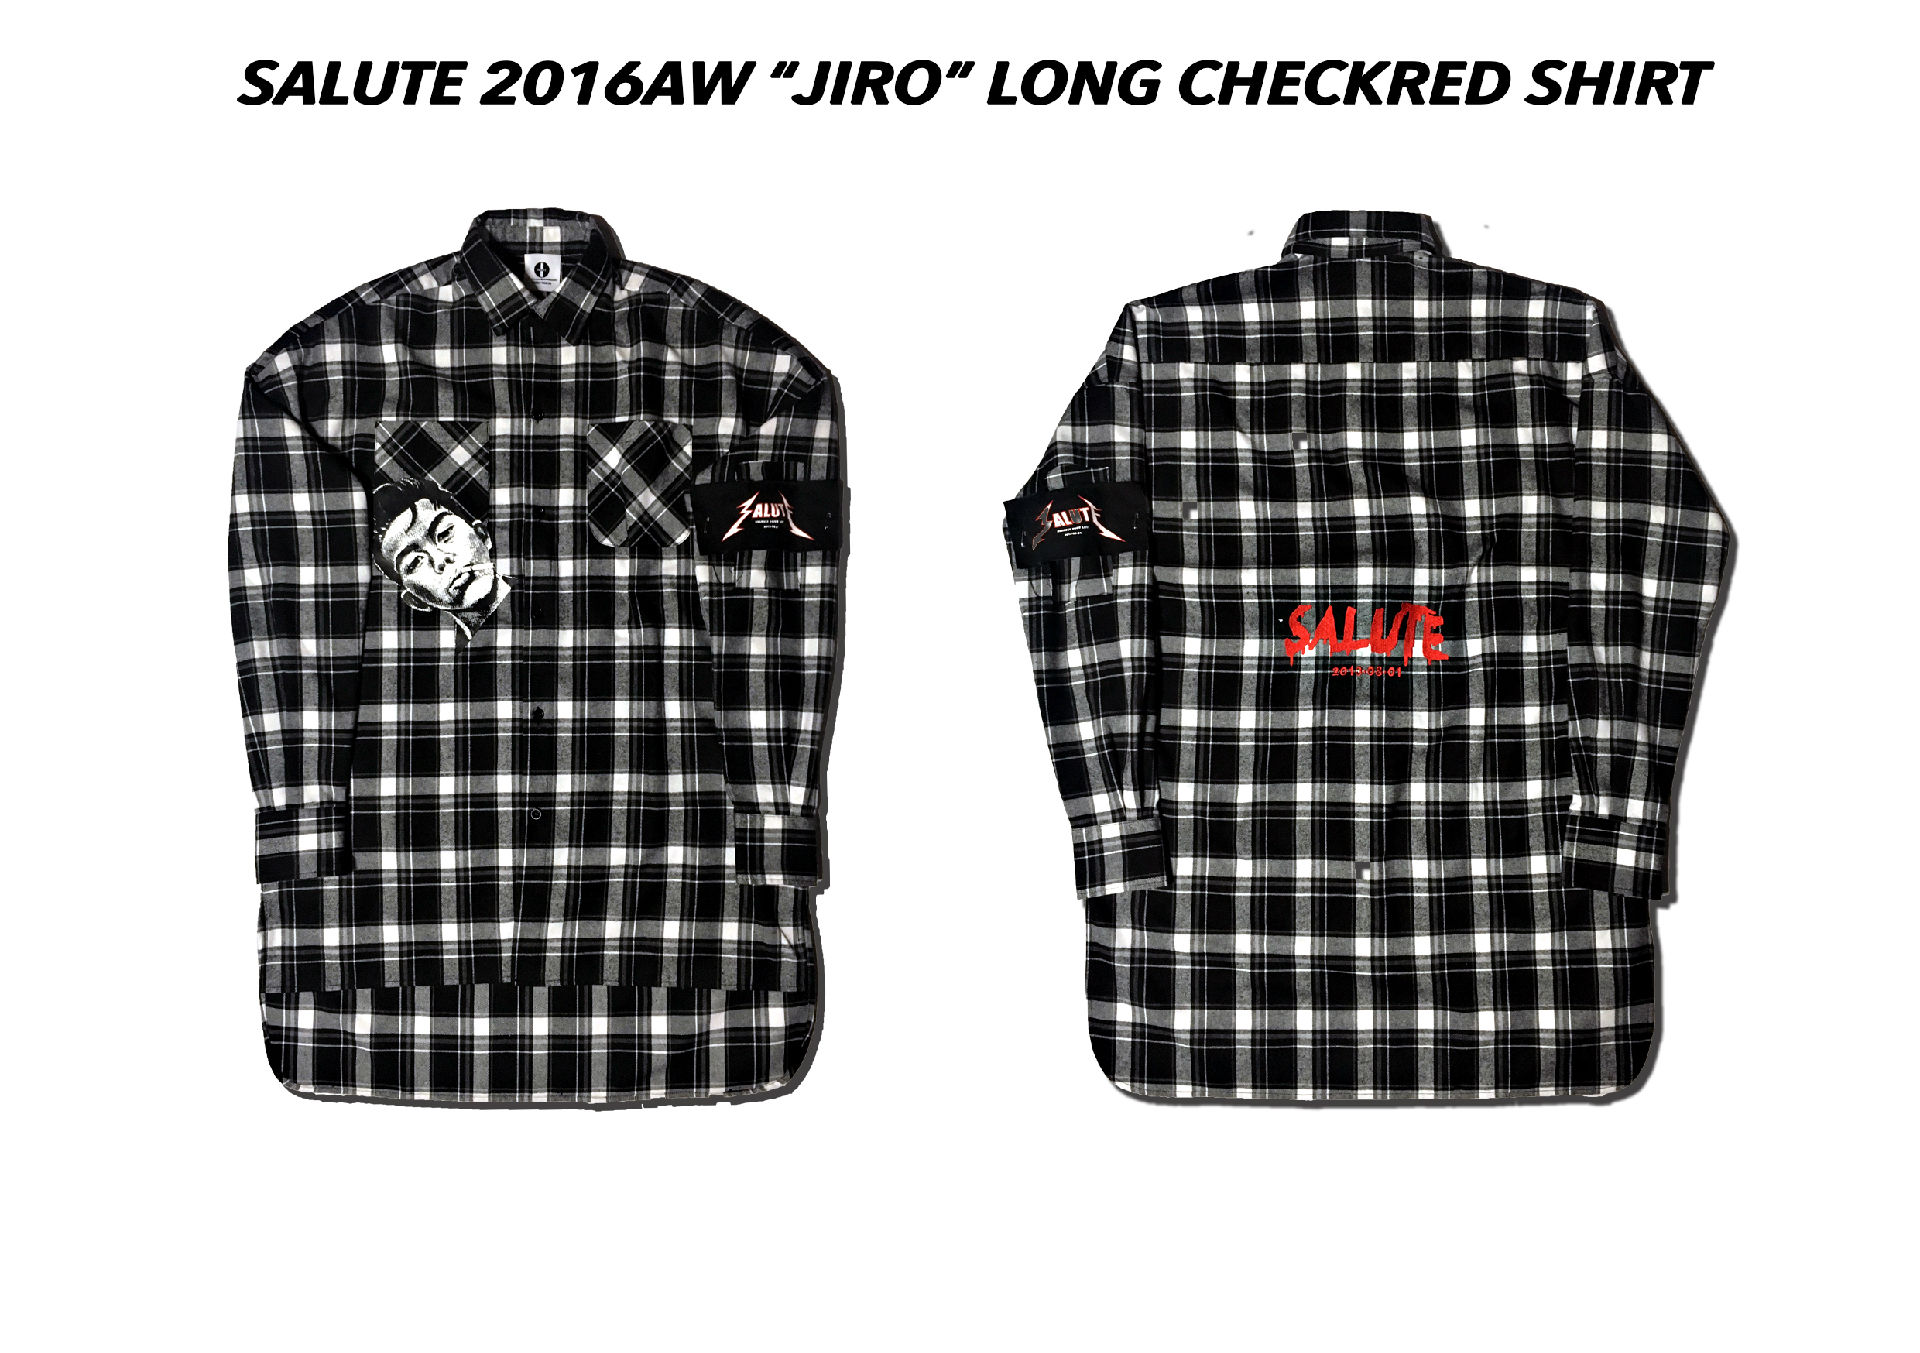 SALUTE 2016AW "JIRO" COLLECTION